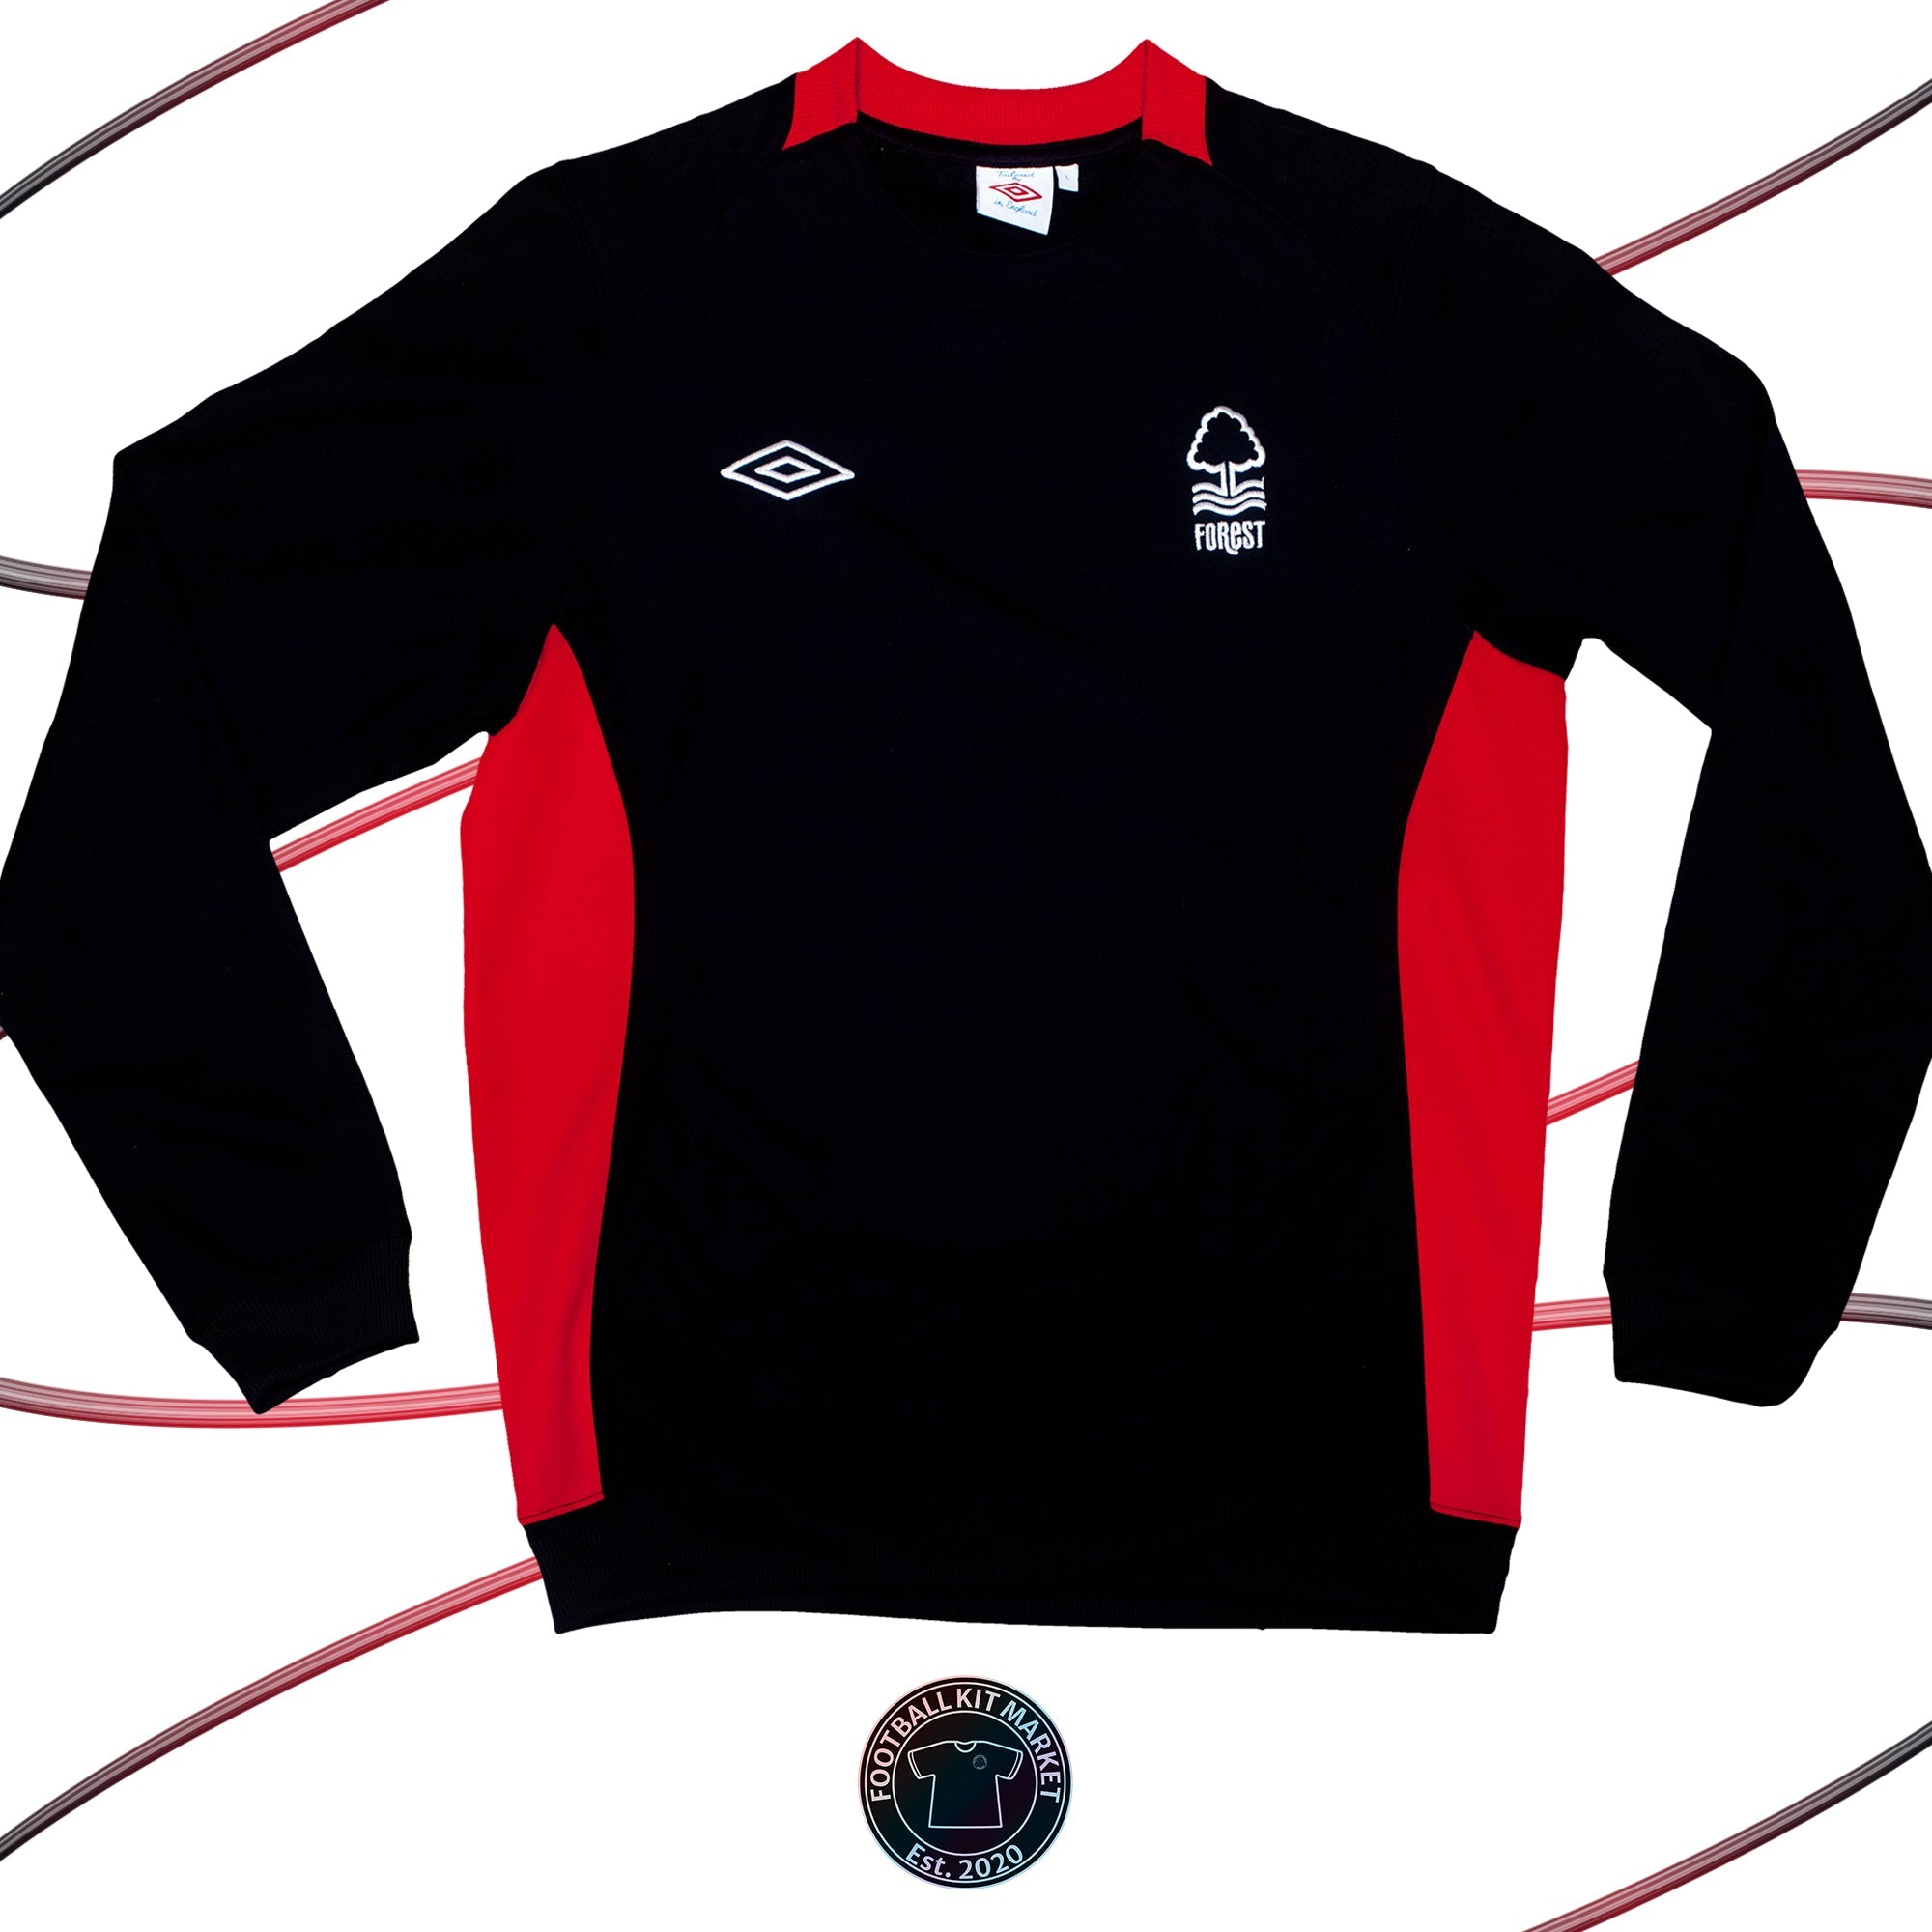 Genuine NOTTINGHAM FOREST Training Top (2010-2011) - UMBRO (L) - Product Image from Football Kit Market